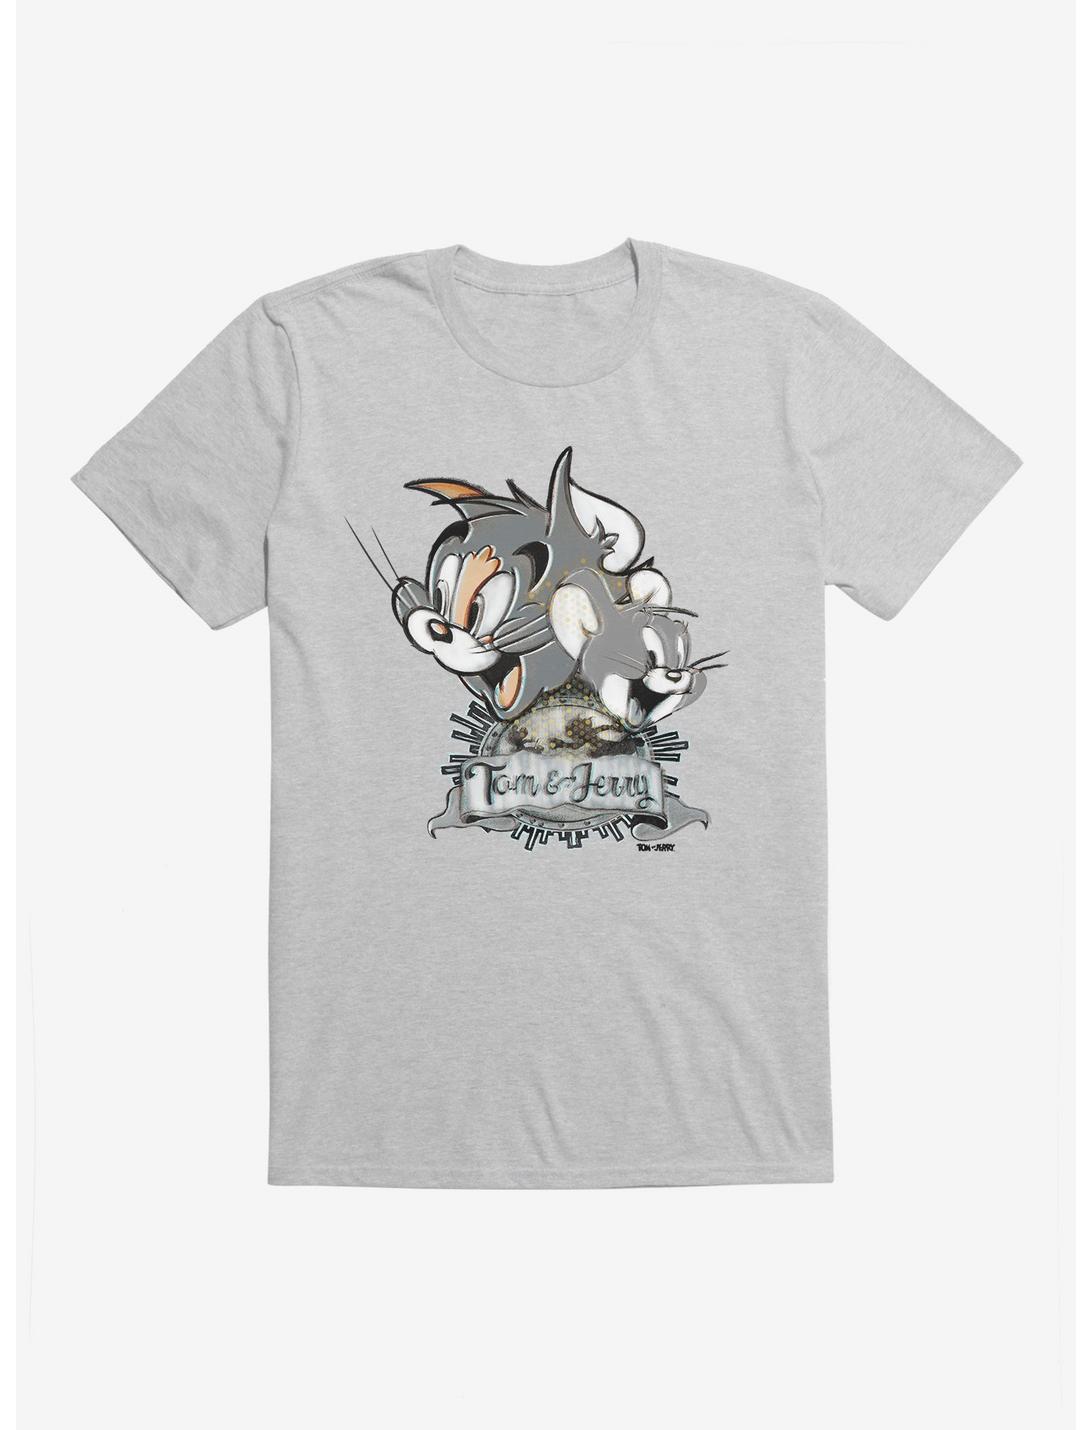 Tom And Jerry Vintage Banner T-Shirt, HEATHER GREY, hi-res